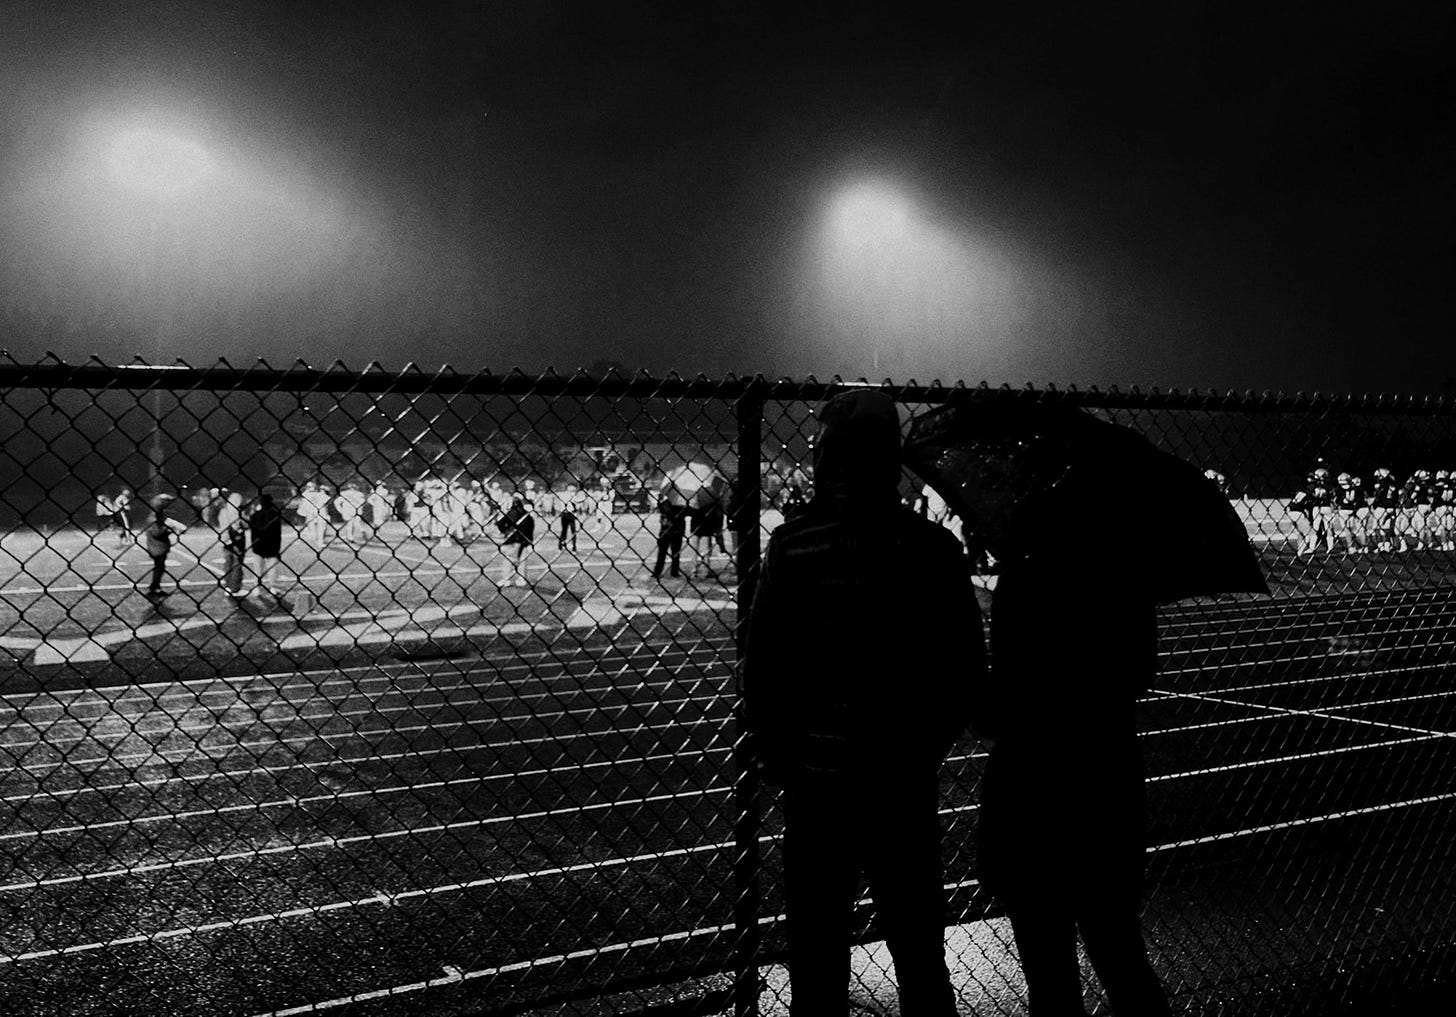 A couple watches the football game from behind the ground level fence near the field.